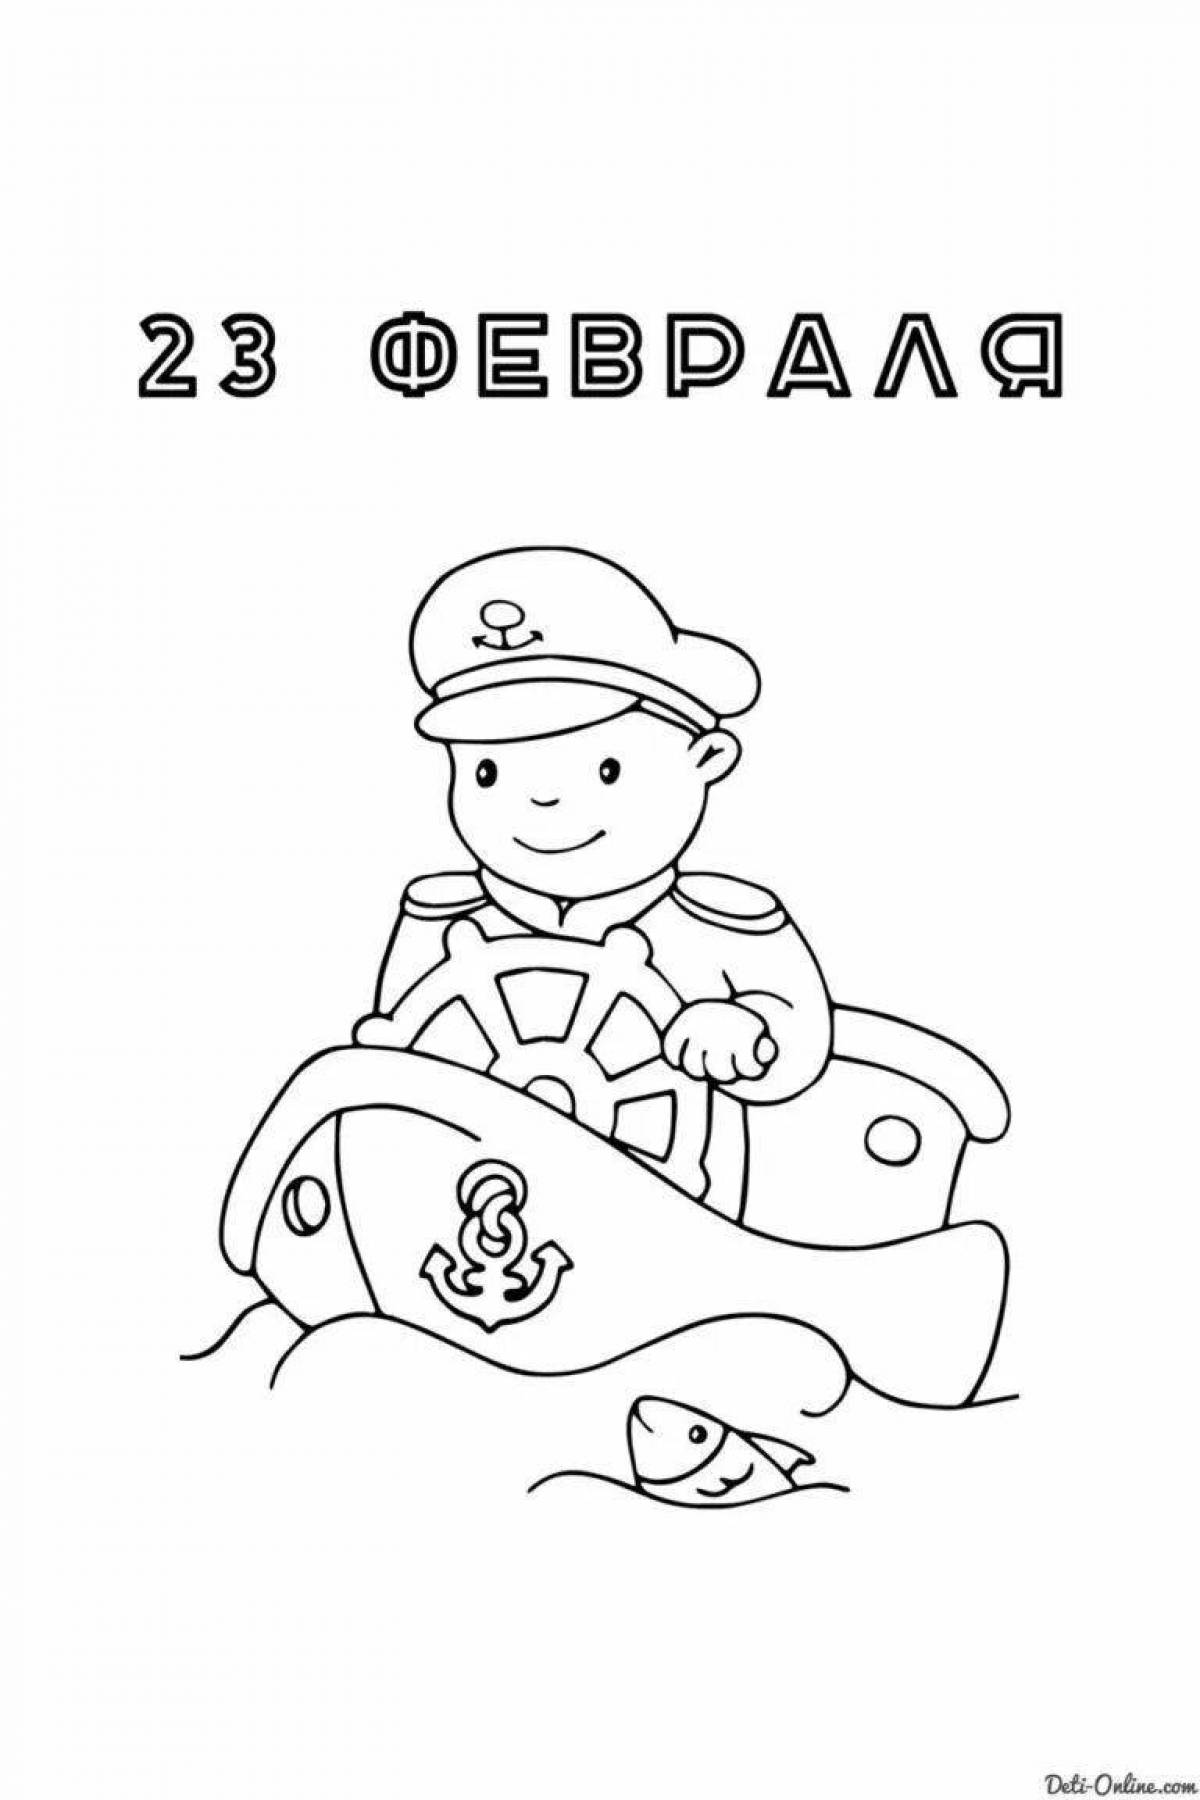 Merry February coloring book for kids